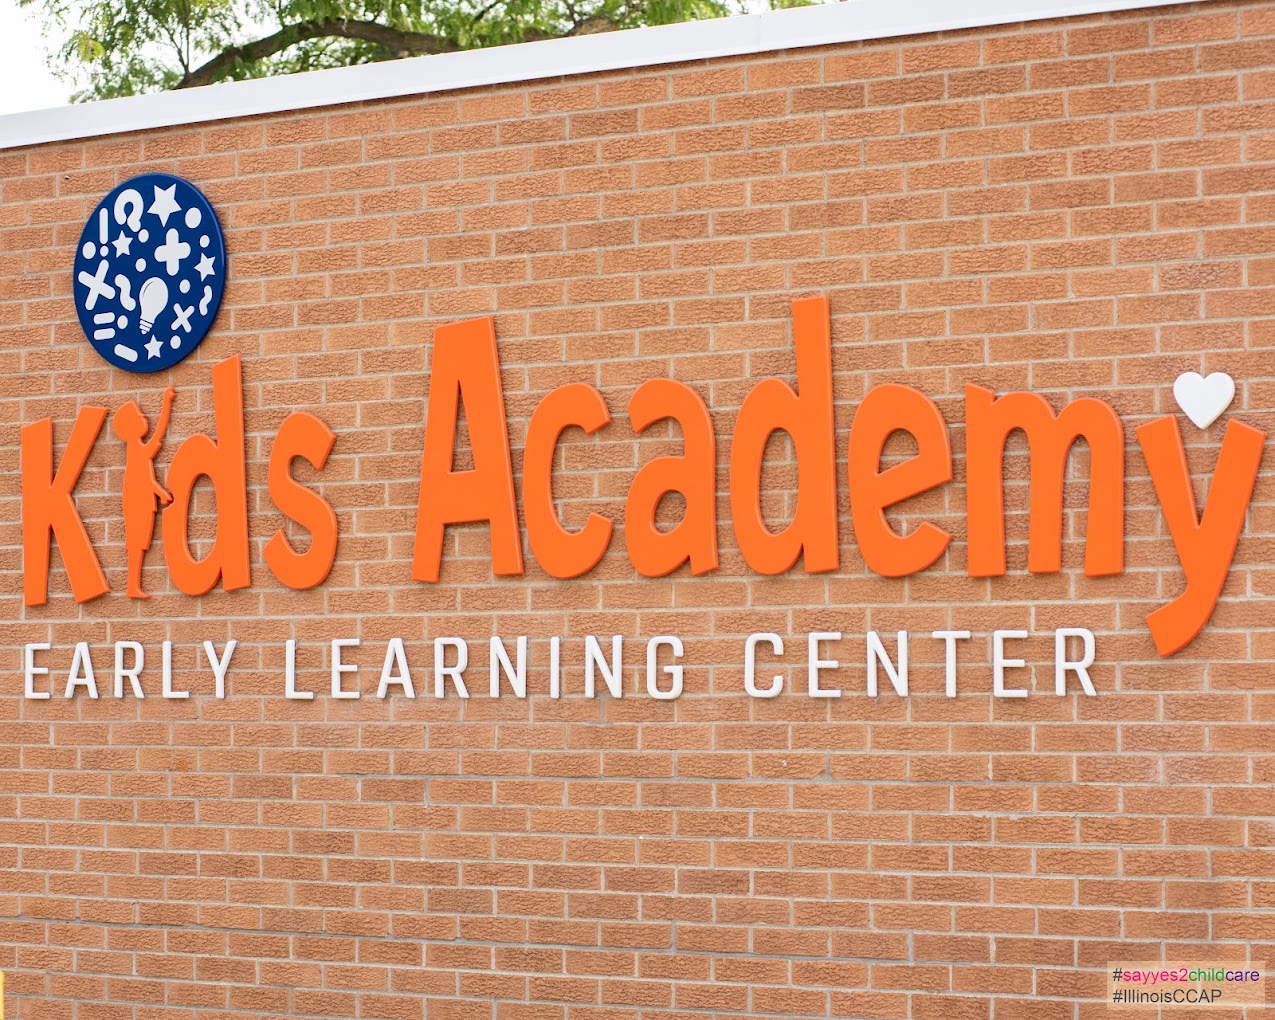 Kids Academy Early Learning Center